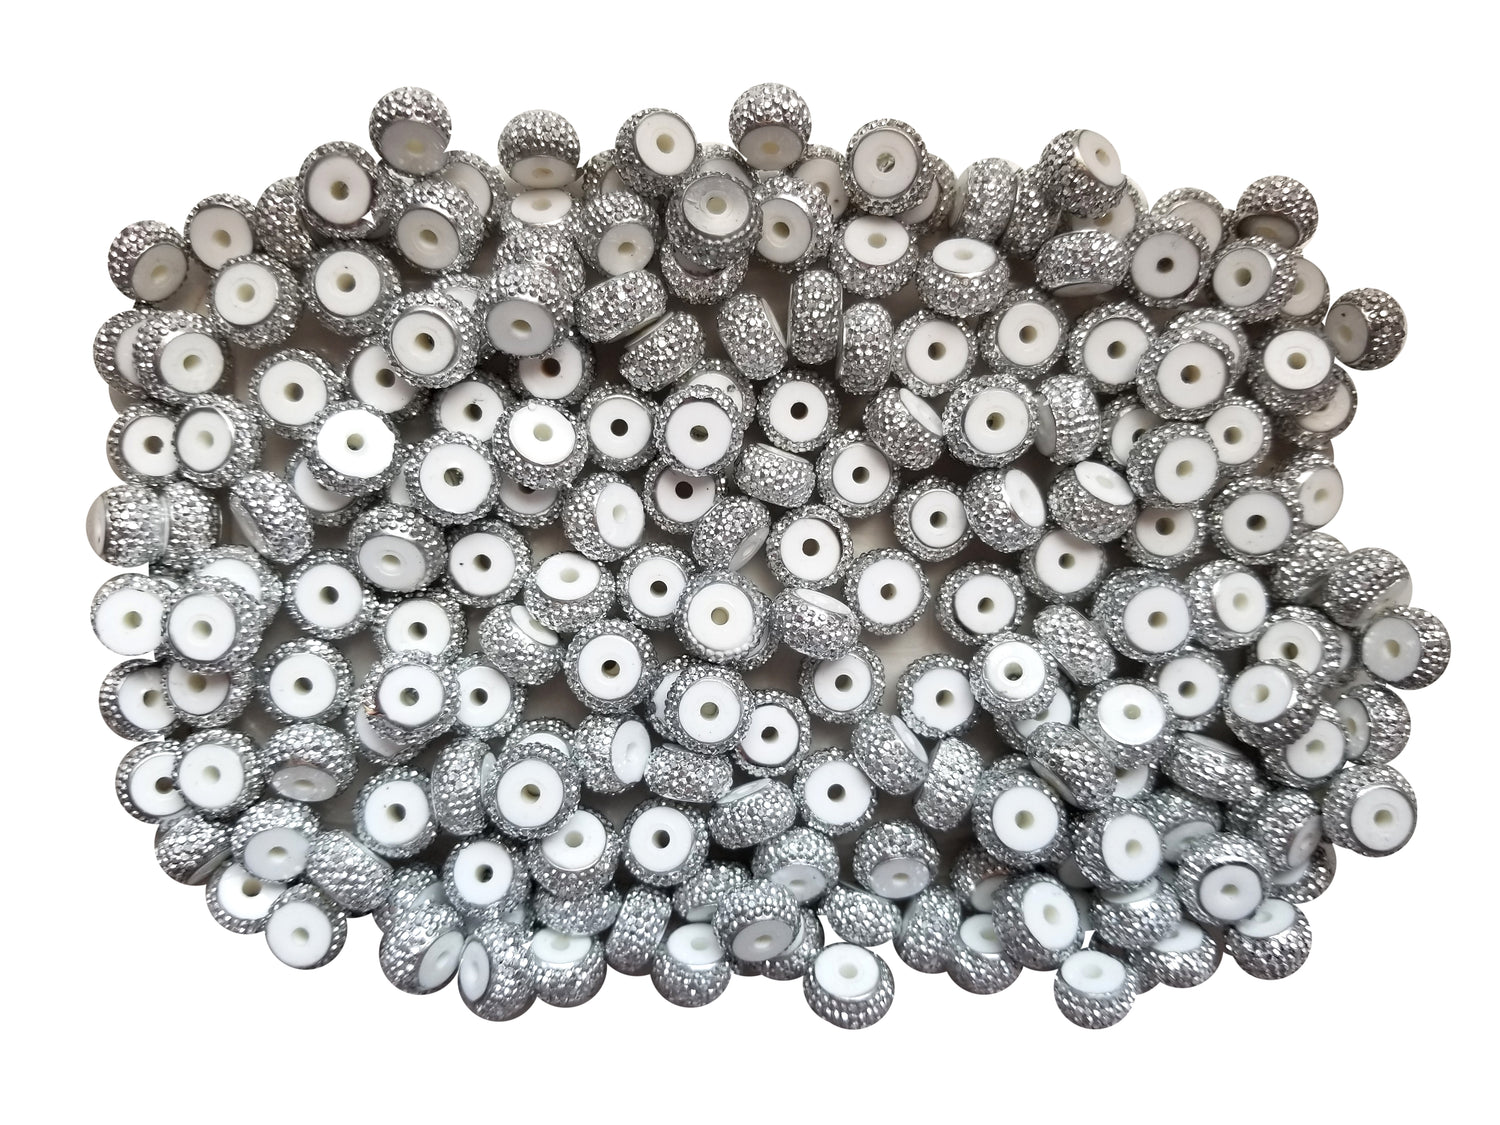 Rhinestone Spacer Beads, 8mm Silver Plated Donut Shaped Beads with